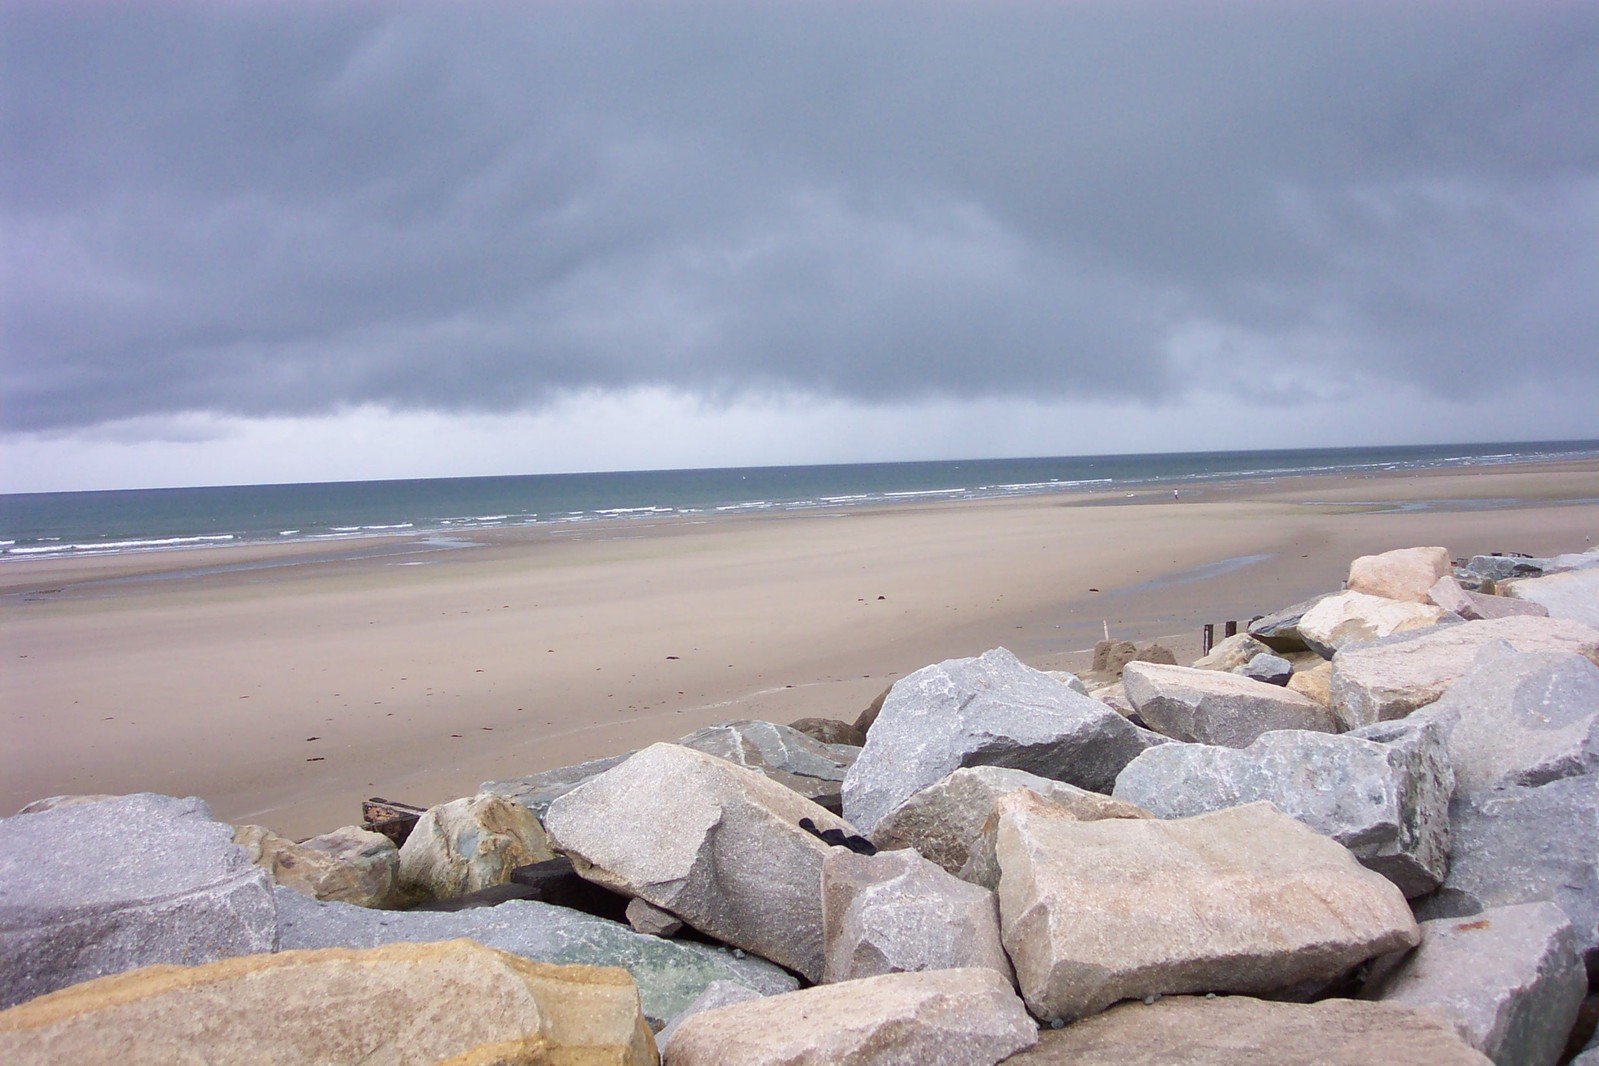 large rocks and boulders stand on the beach near the water